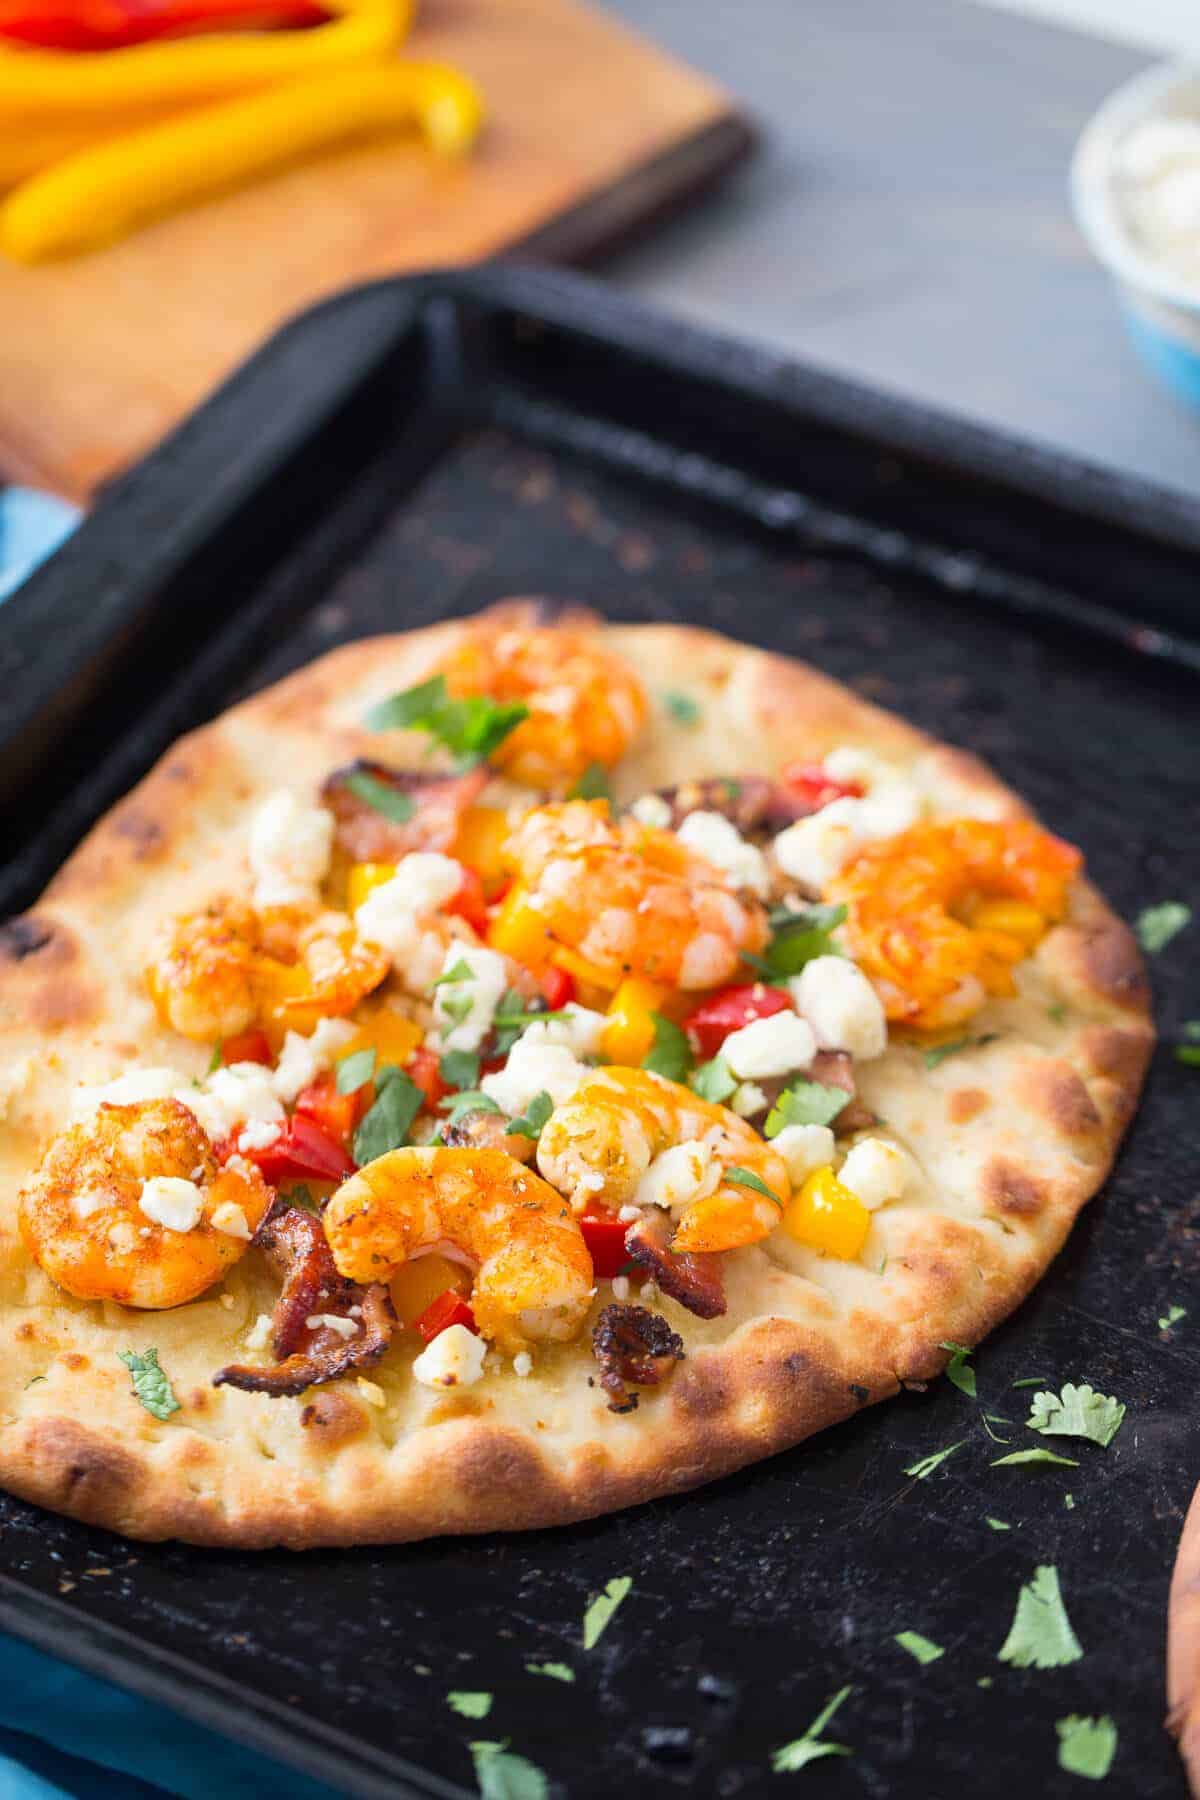 This Cajun Shrimp Pizza is so easy and the blend of flavors is amazing!